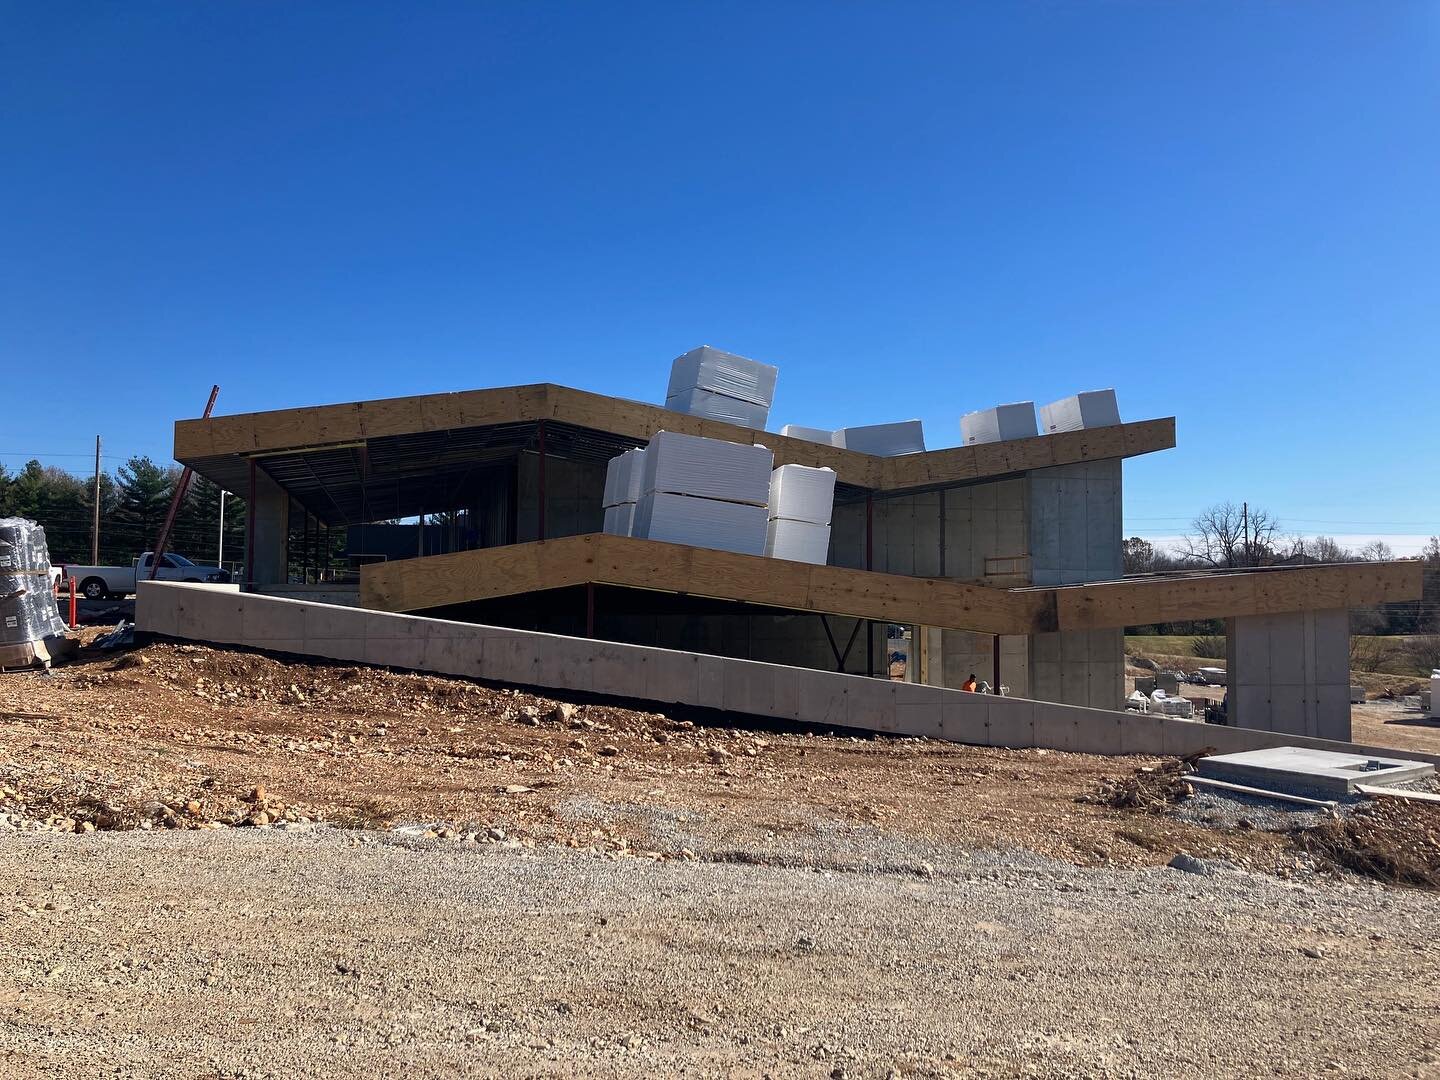 Headed out to our H2D2 building for a site visit earlier this week. So exciting seeing the progress being made! 

#ozarkmodernism #architecture #modernarchitecture #design #arkifexstudios #springfield #sgf #springfieldmo #springfieldmissouri